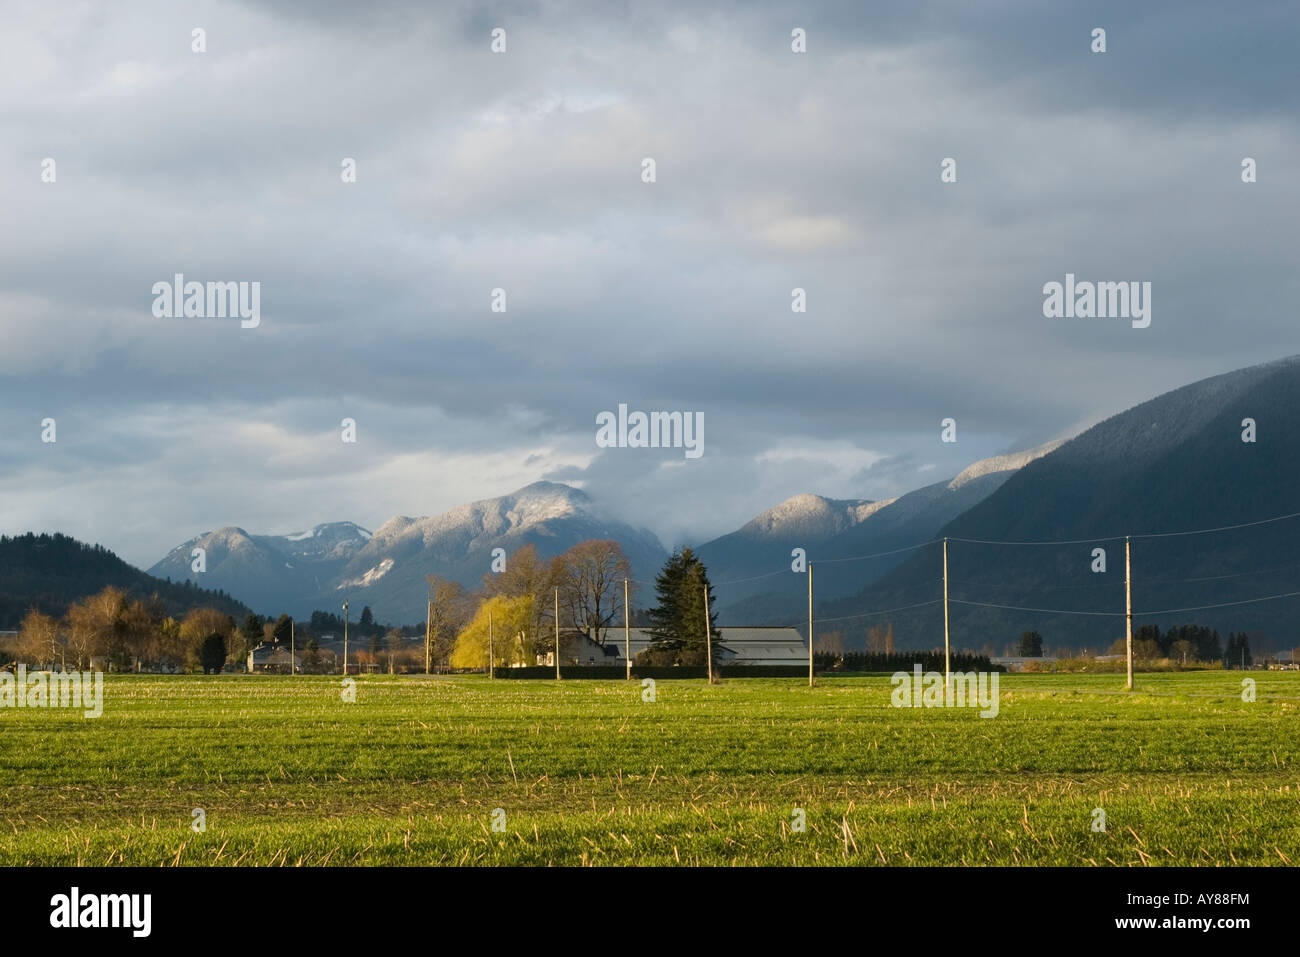 Farm field with a stormy sky in the distance Abbotsford Canada Stock Photo